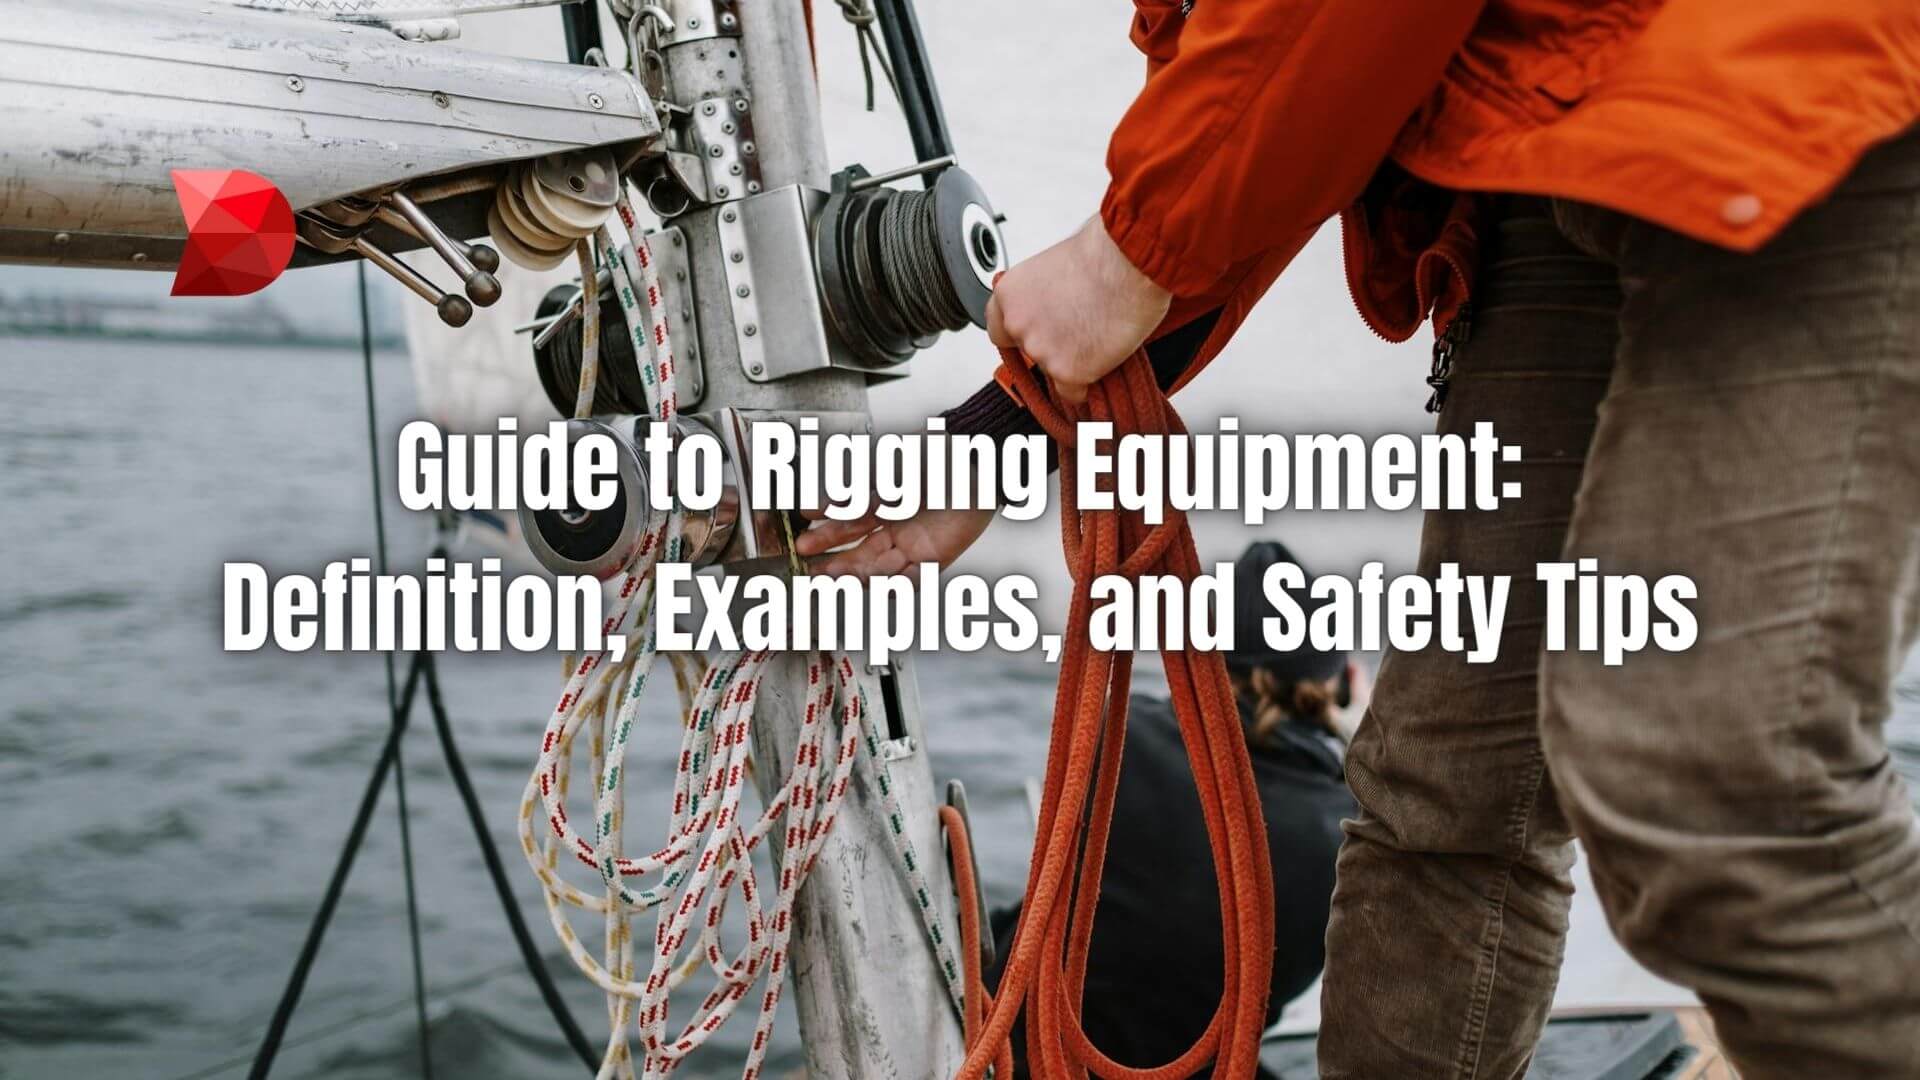 Discover the ins and outs of rigging equipments! Learn definitions, explore examples, and master safety tips for efficient rigging practices.